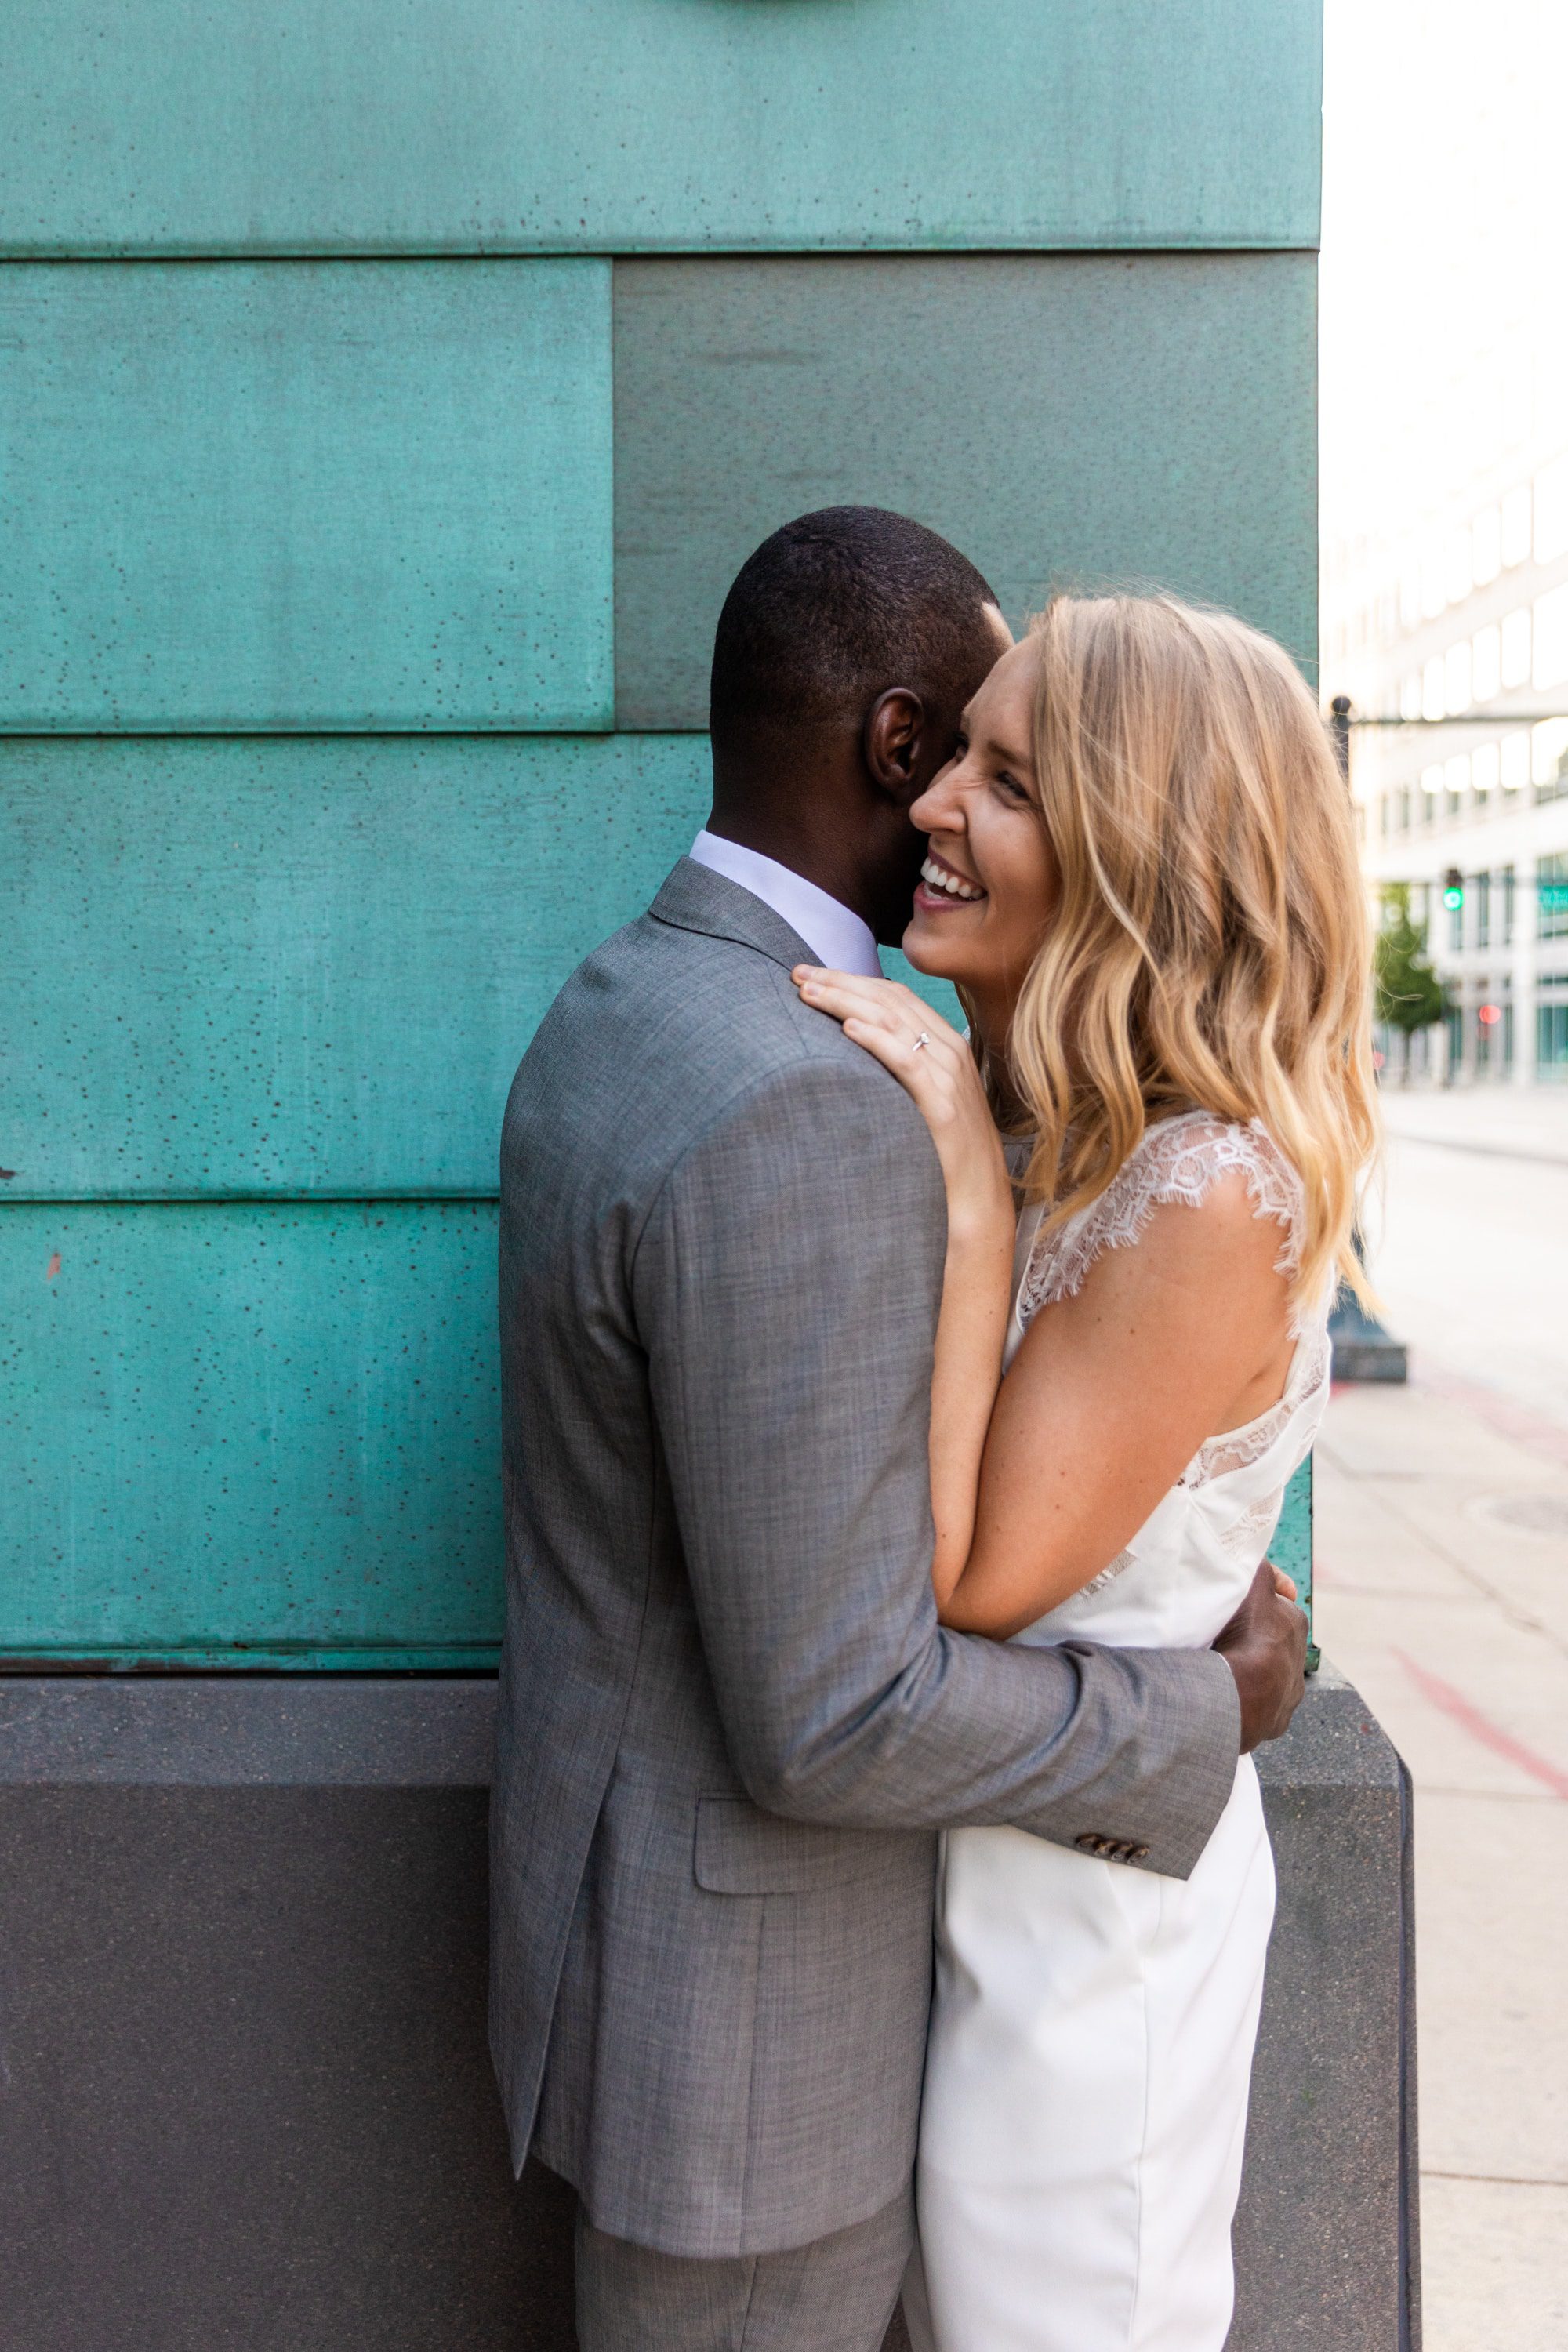 couple snuggling, couple photoshoot, colorado wedding photographer, downtown wedding photographer, urban elopement, formal outfit elopement